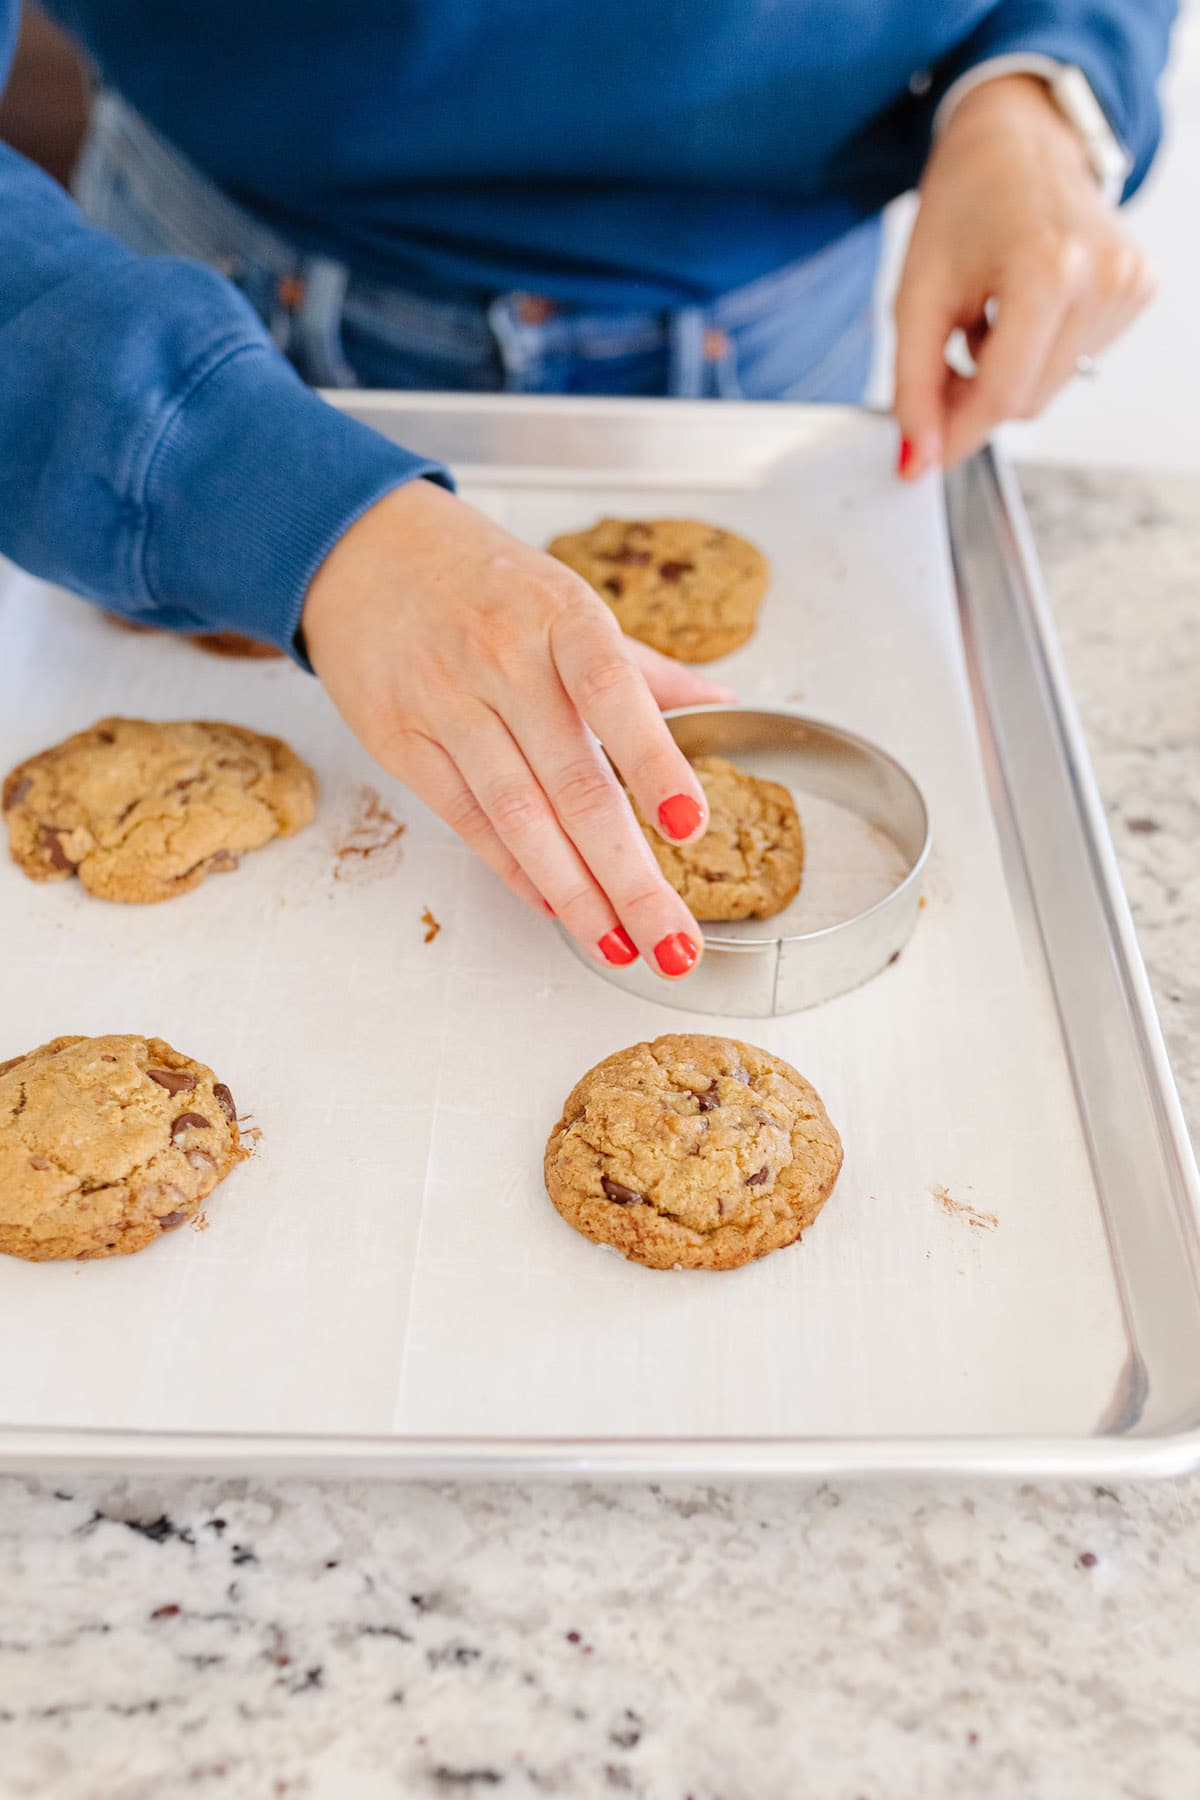 Using a large circular cookie cutter to shape freshly baked cookies into circles